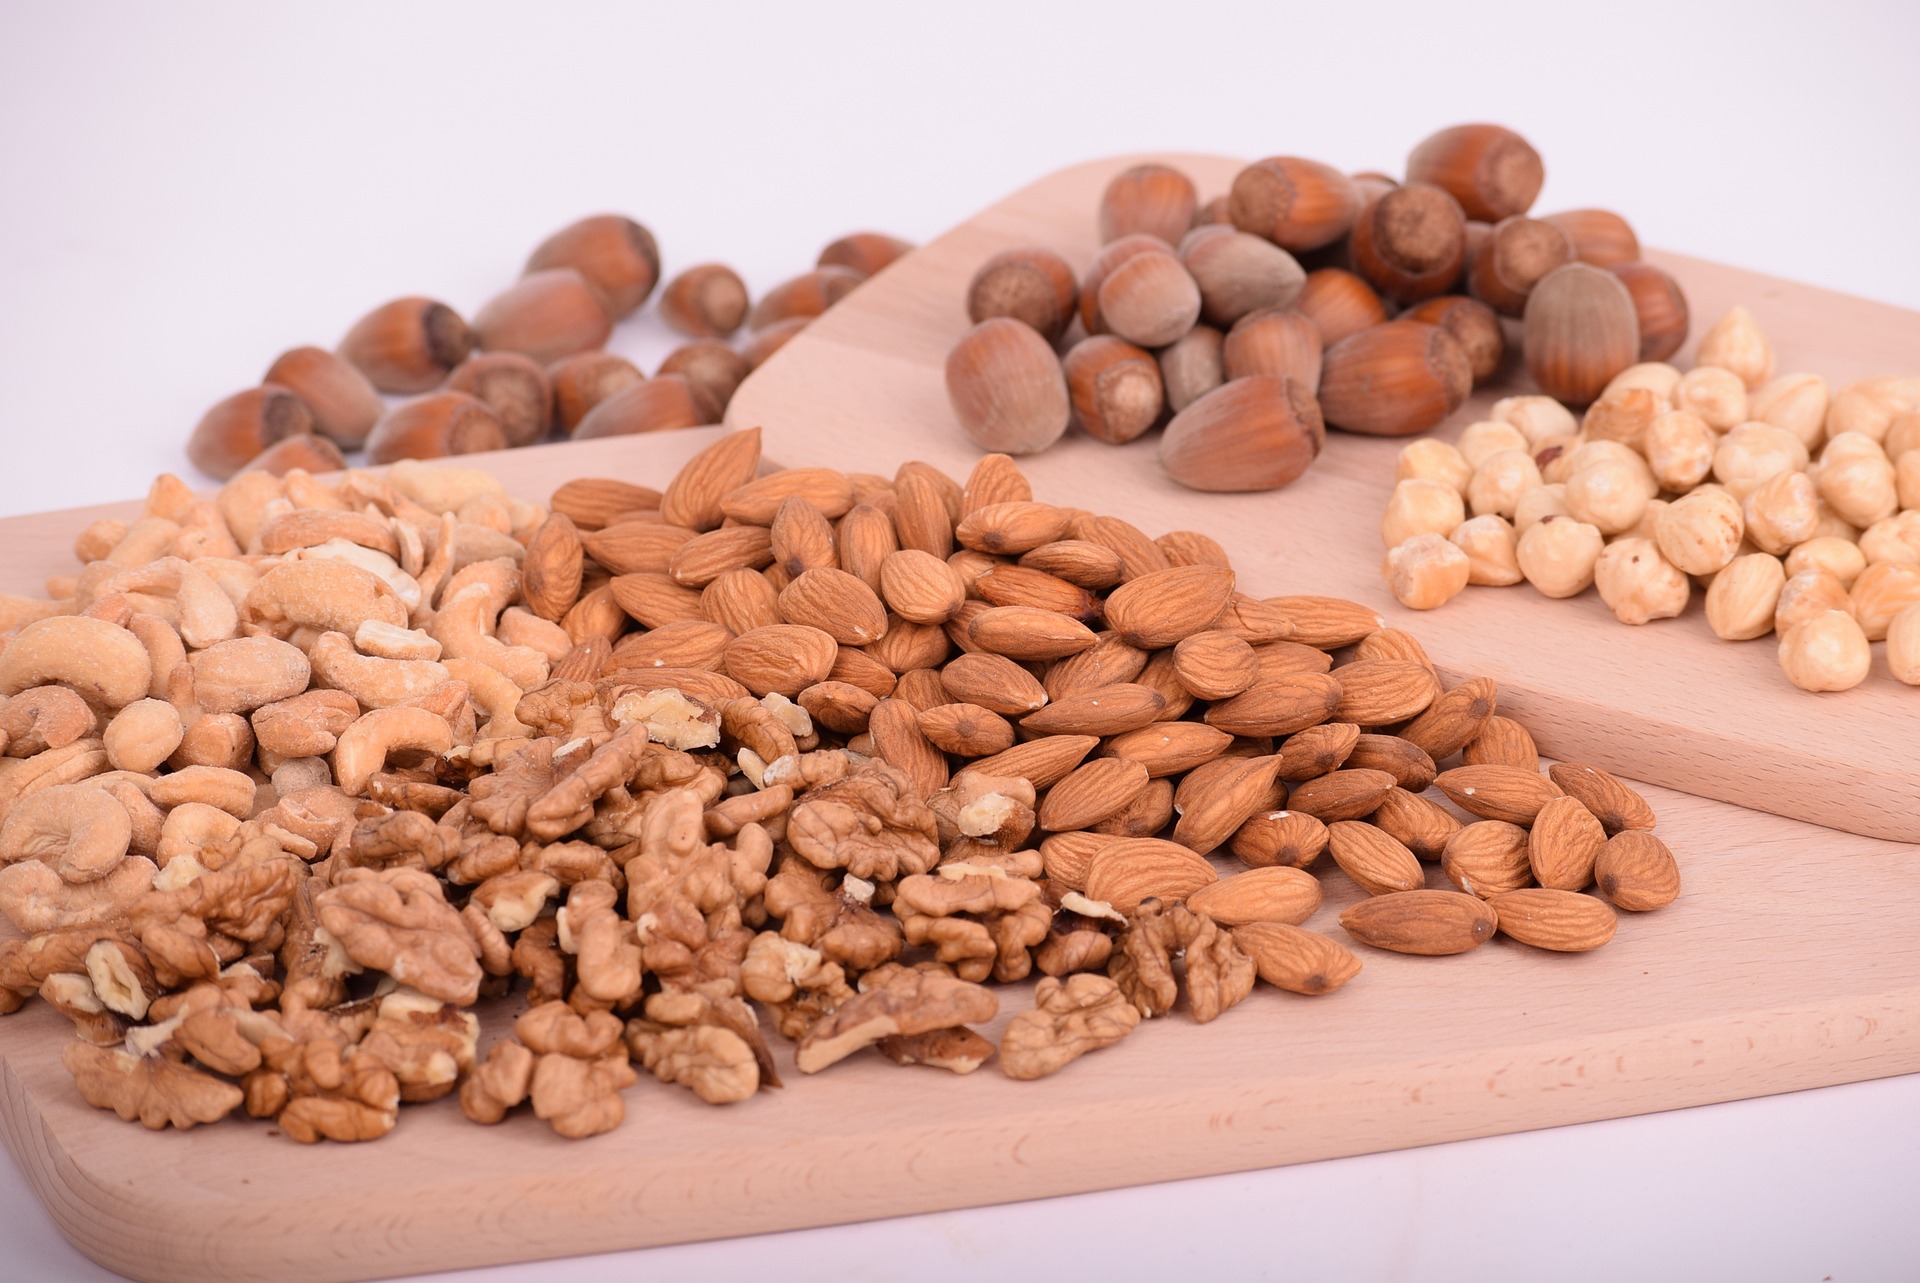 A chopping board, with various nuts including walnuts, almonds, and cashews; our nut allergy compensation solicitors can assist you with making a compensation claim.  Click this picture to read more about nut allergy compensation claims.